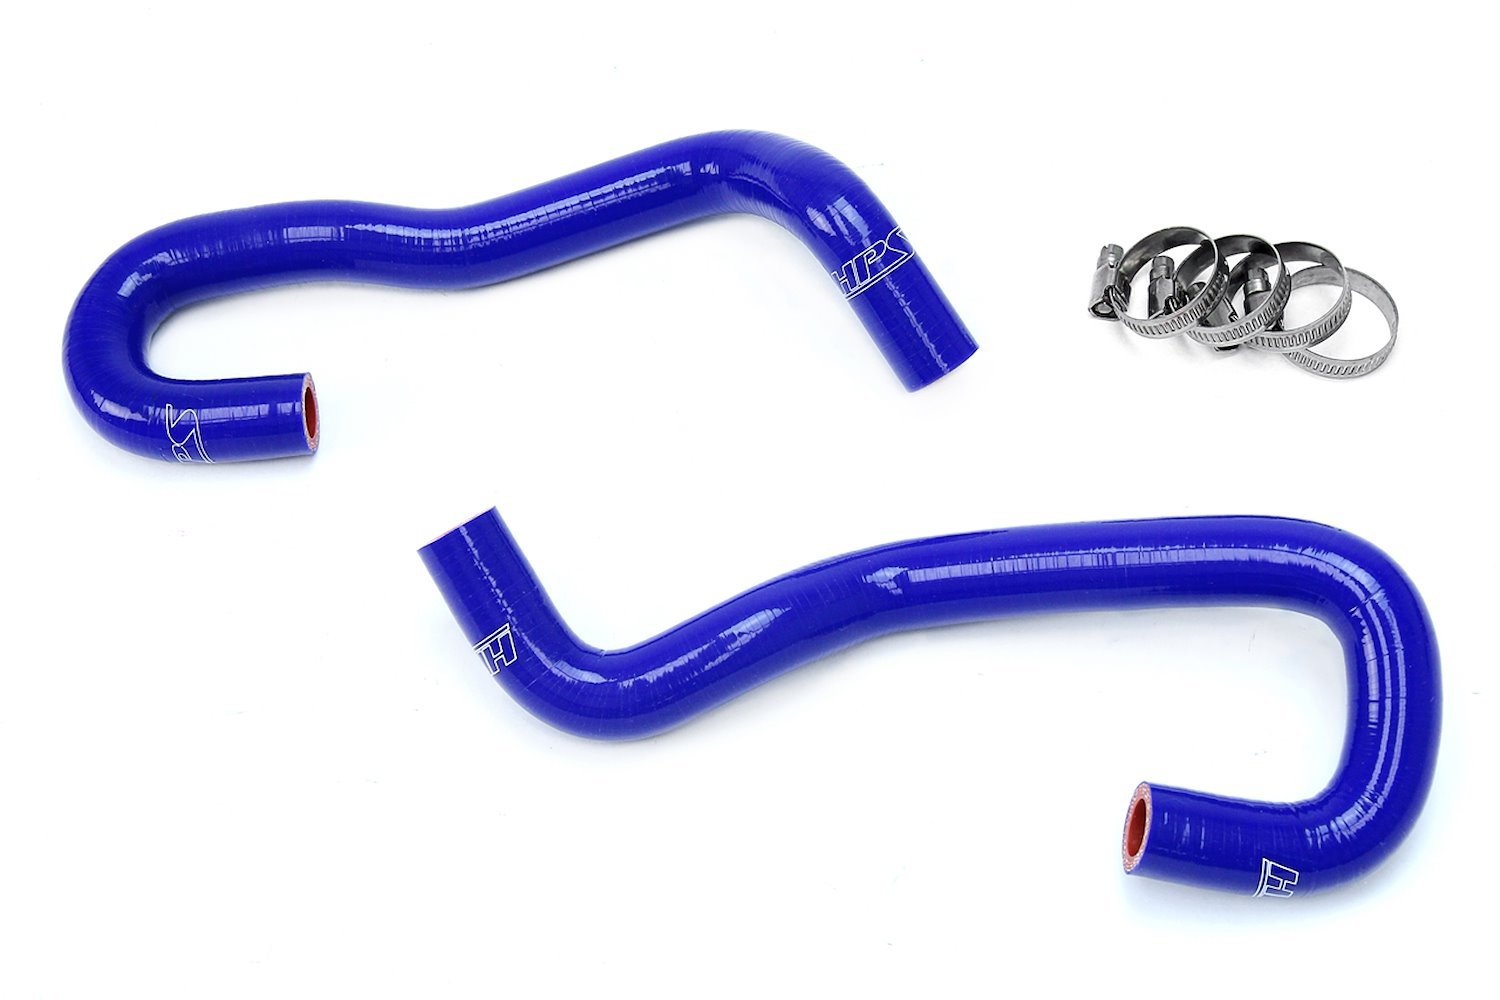 57-1700-BLUE Heater Hose Kit, High-Temp 3-Ply Reinforced Silicone, Replace OEM Rubber Heater Coolant Hoses